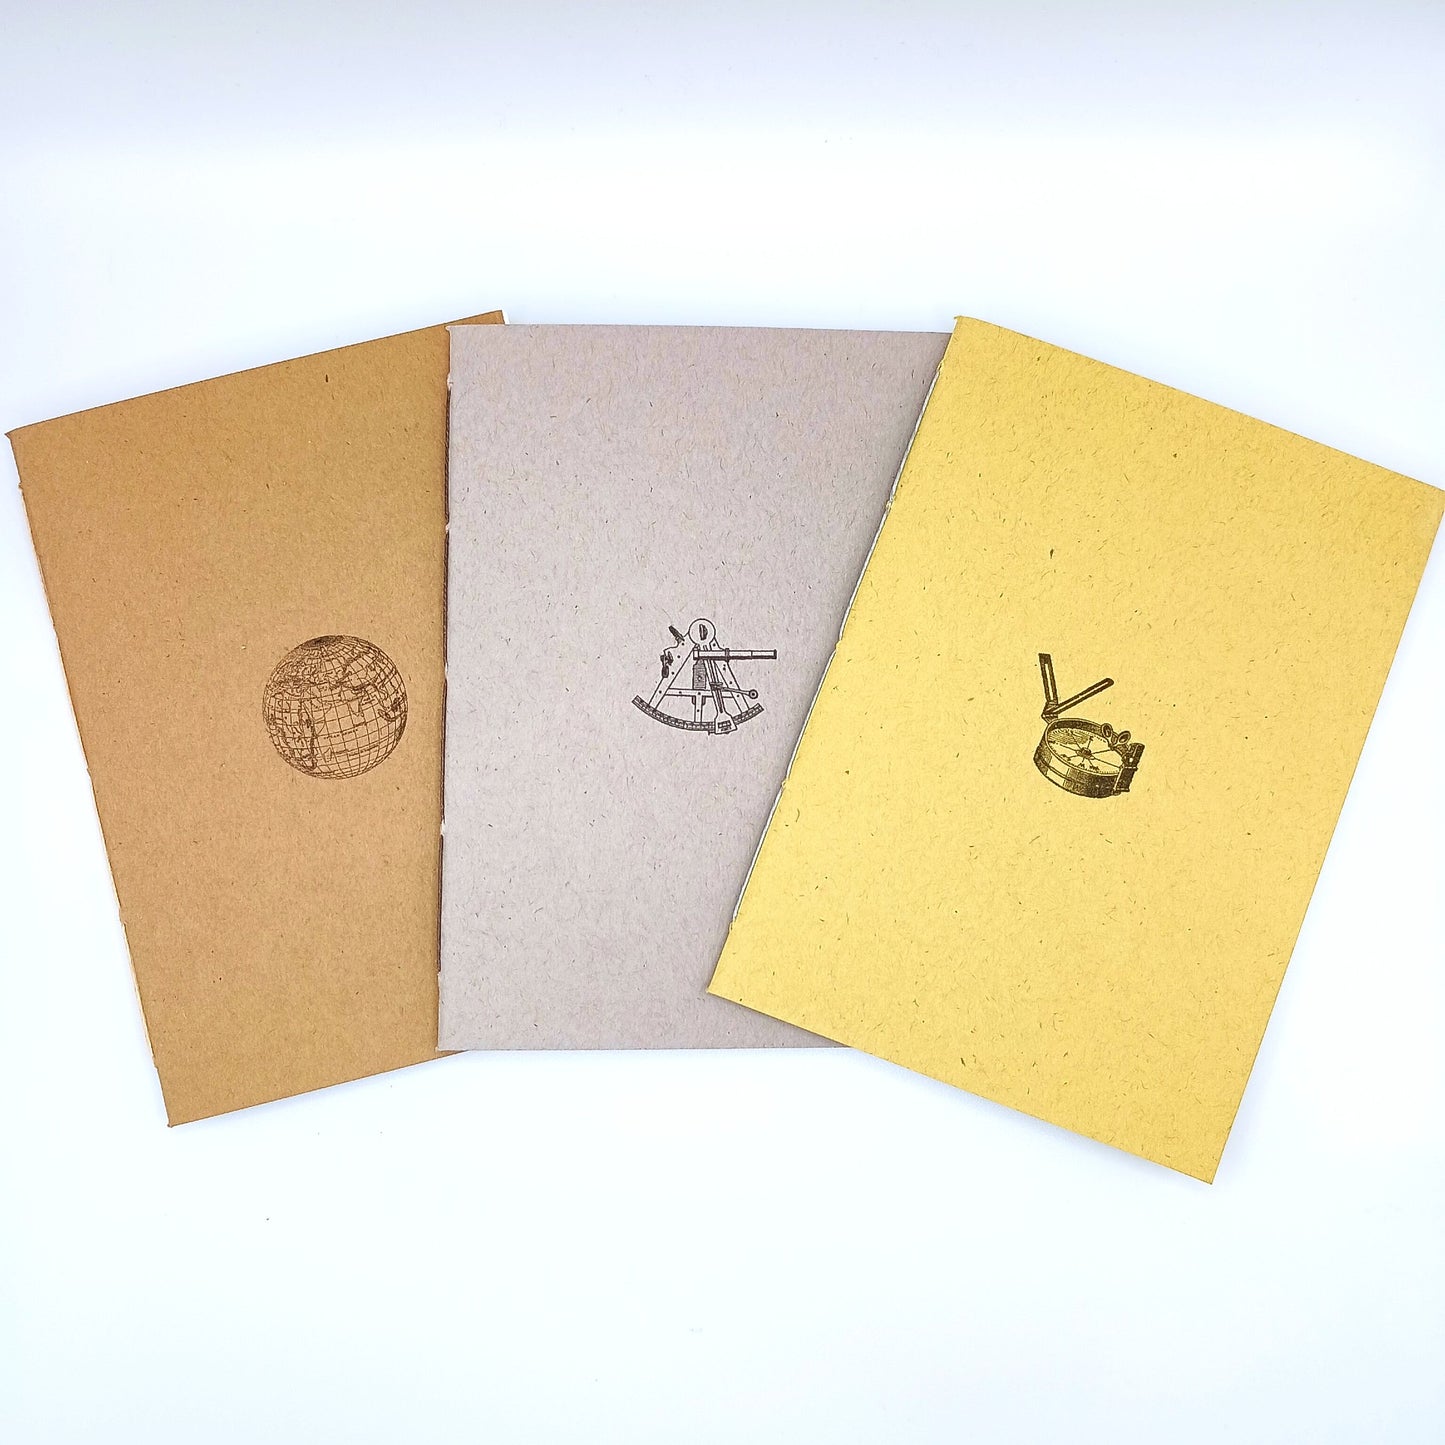 Find Your Way Companion Notebooks